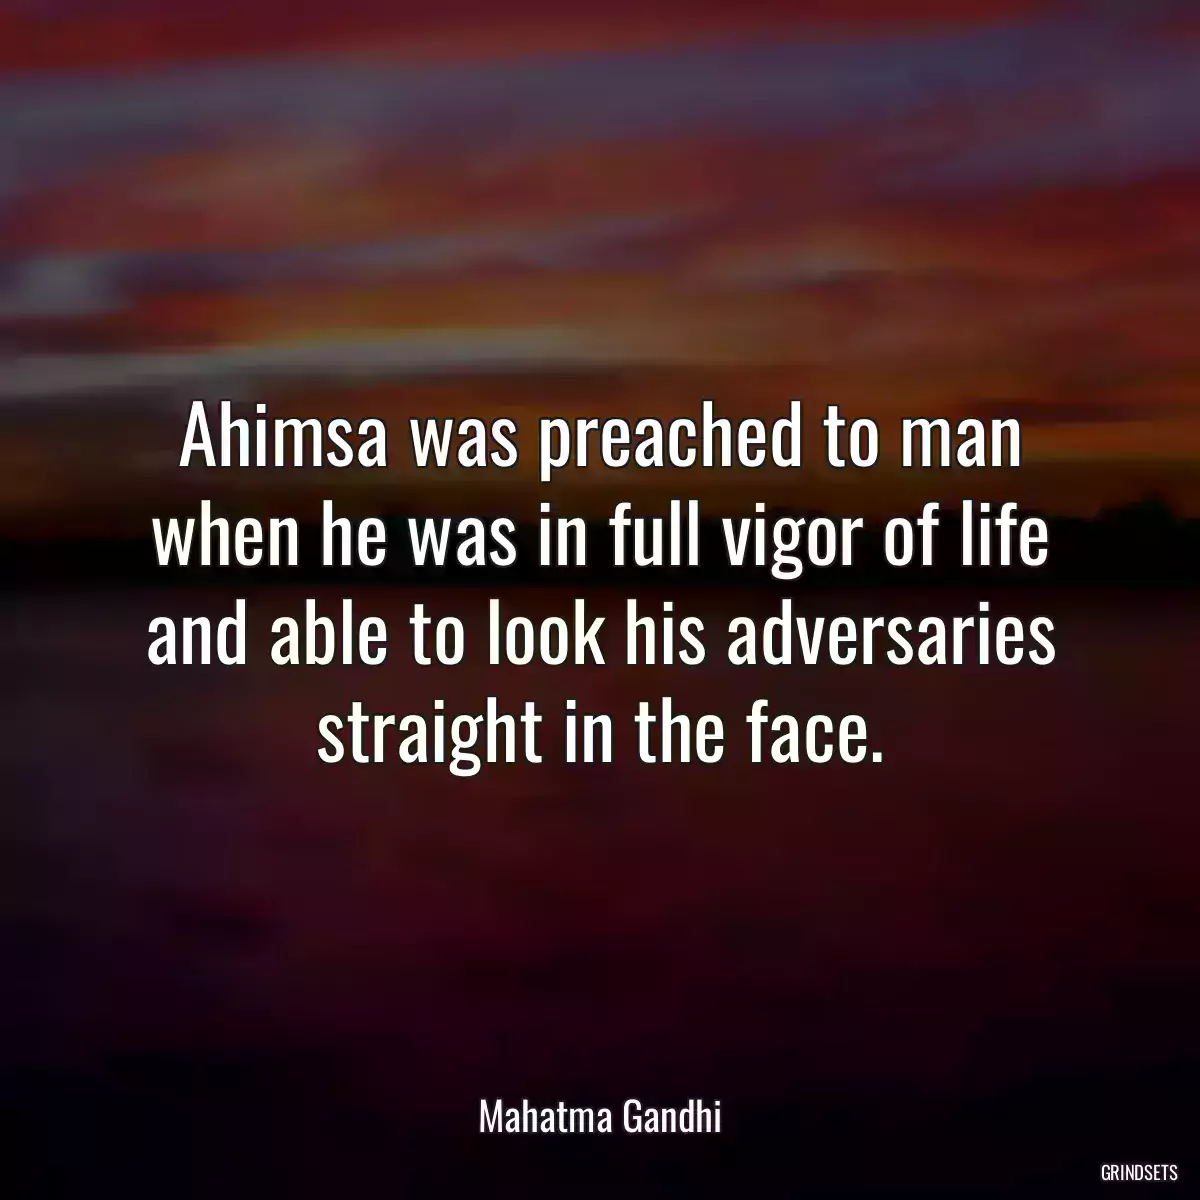 Ahimsa was preached to man when he was in full vigor of life and able to look his adversaries straight in the face.